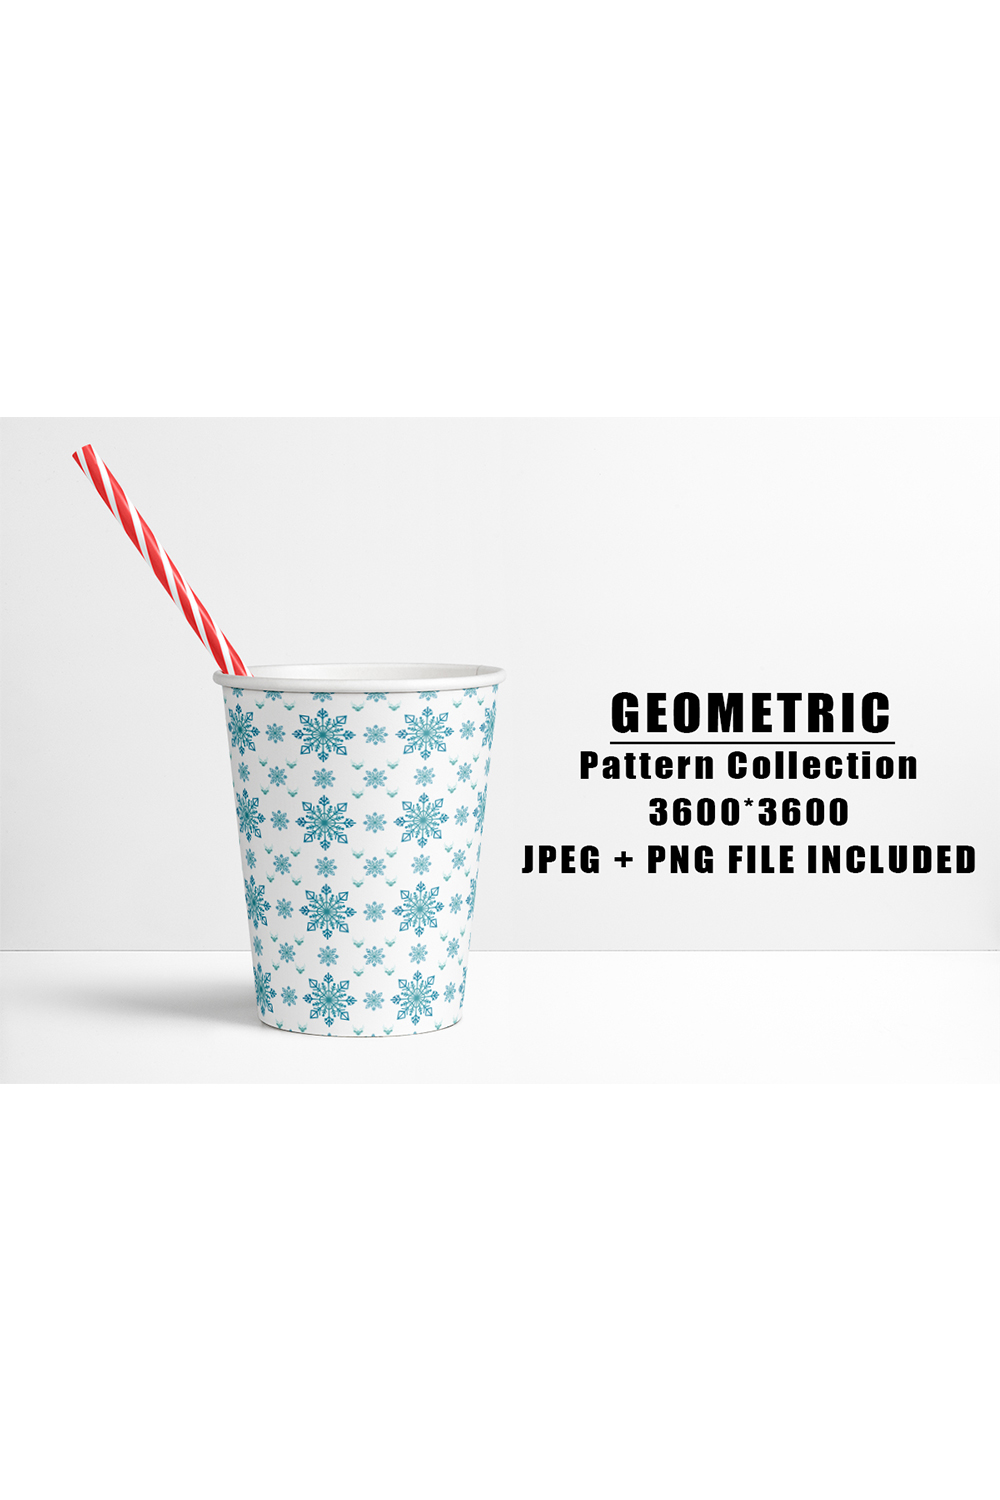 Image of a paper cup with beautiful geometric patterns